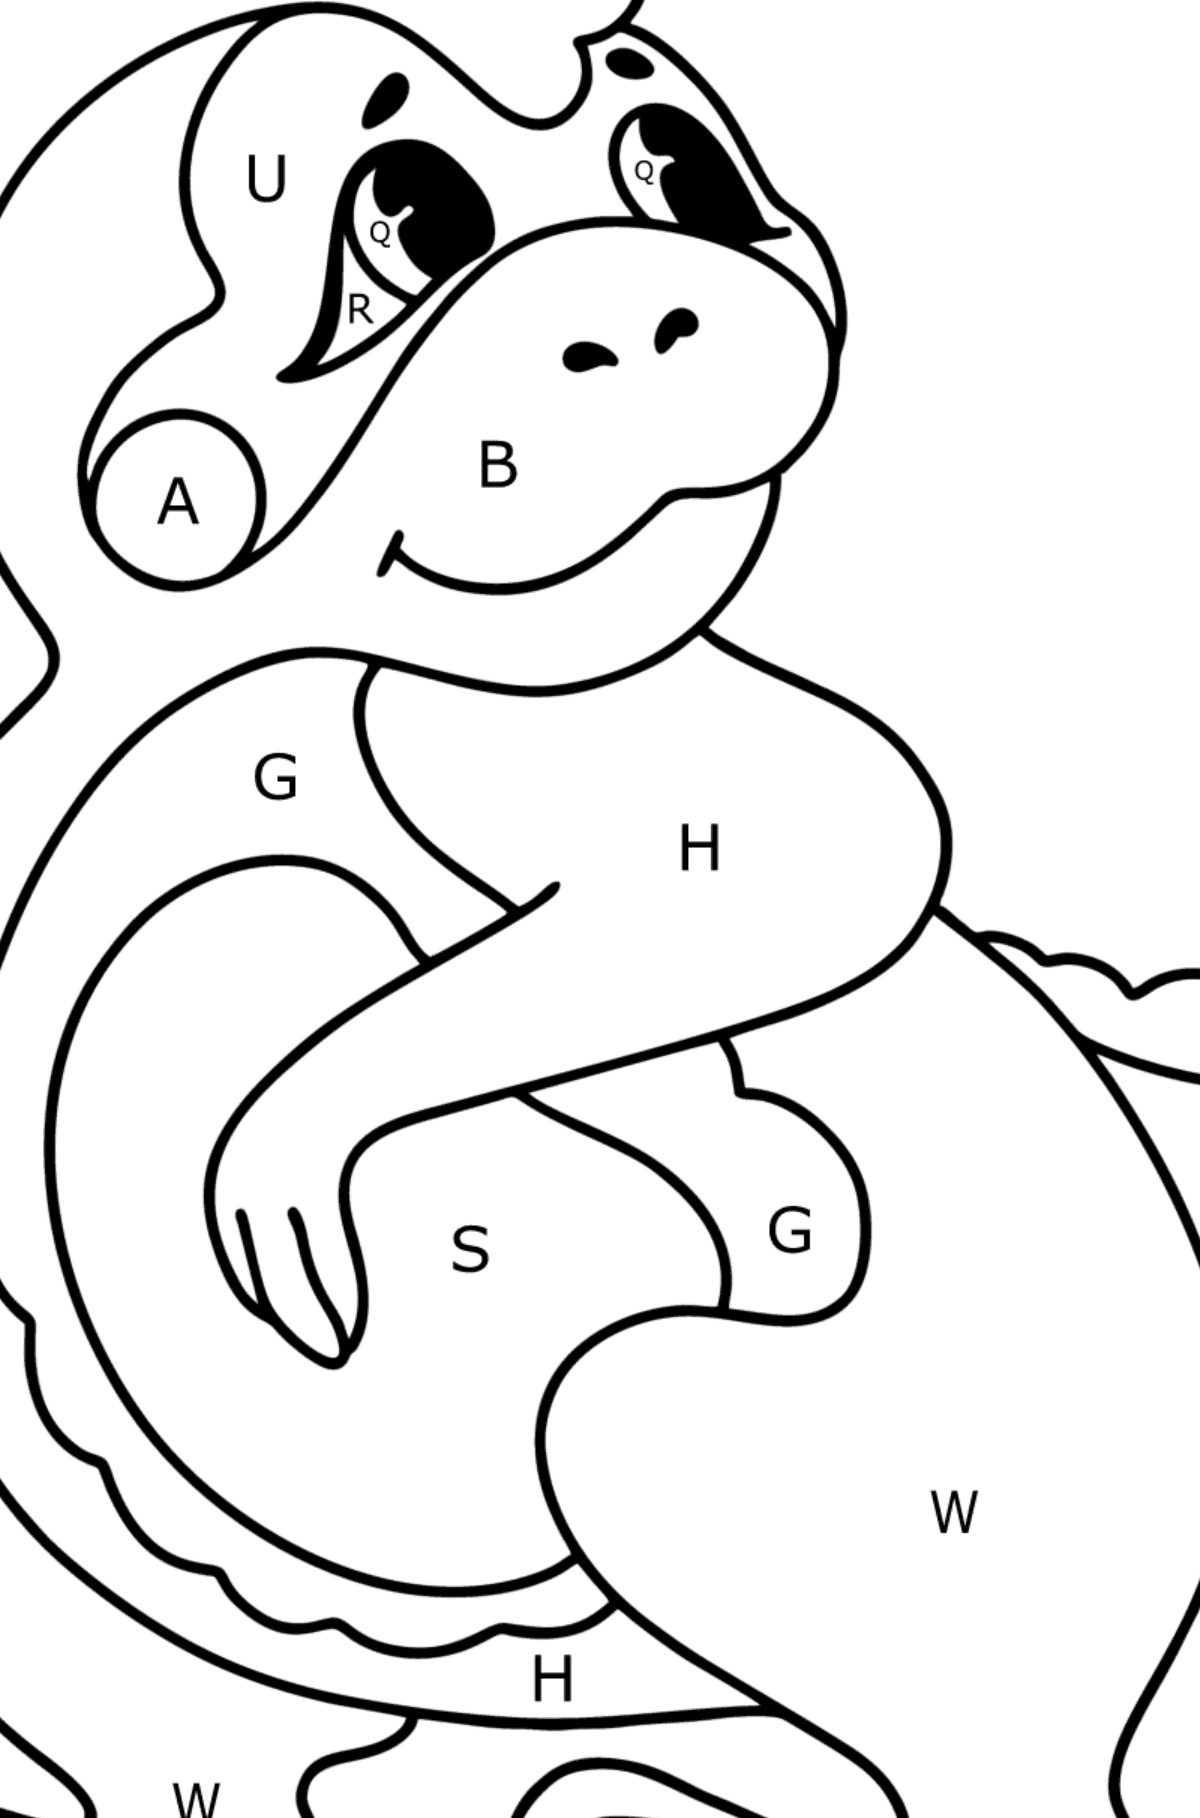 Baby dragon coloring page - Coloring by Letters for Kids